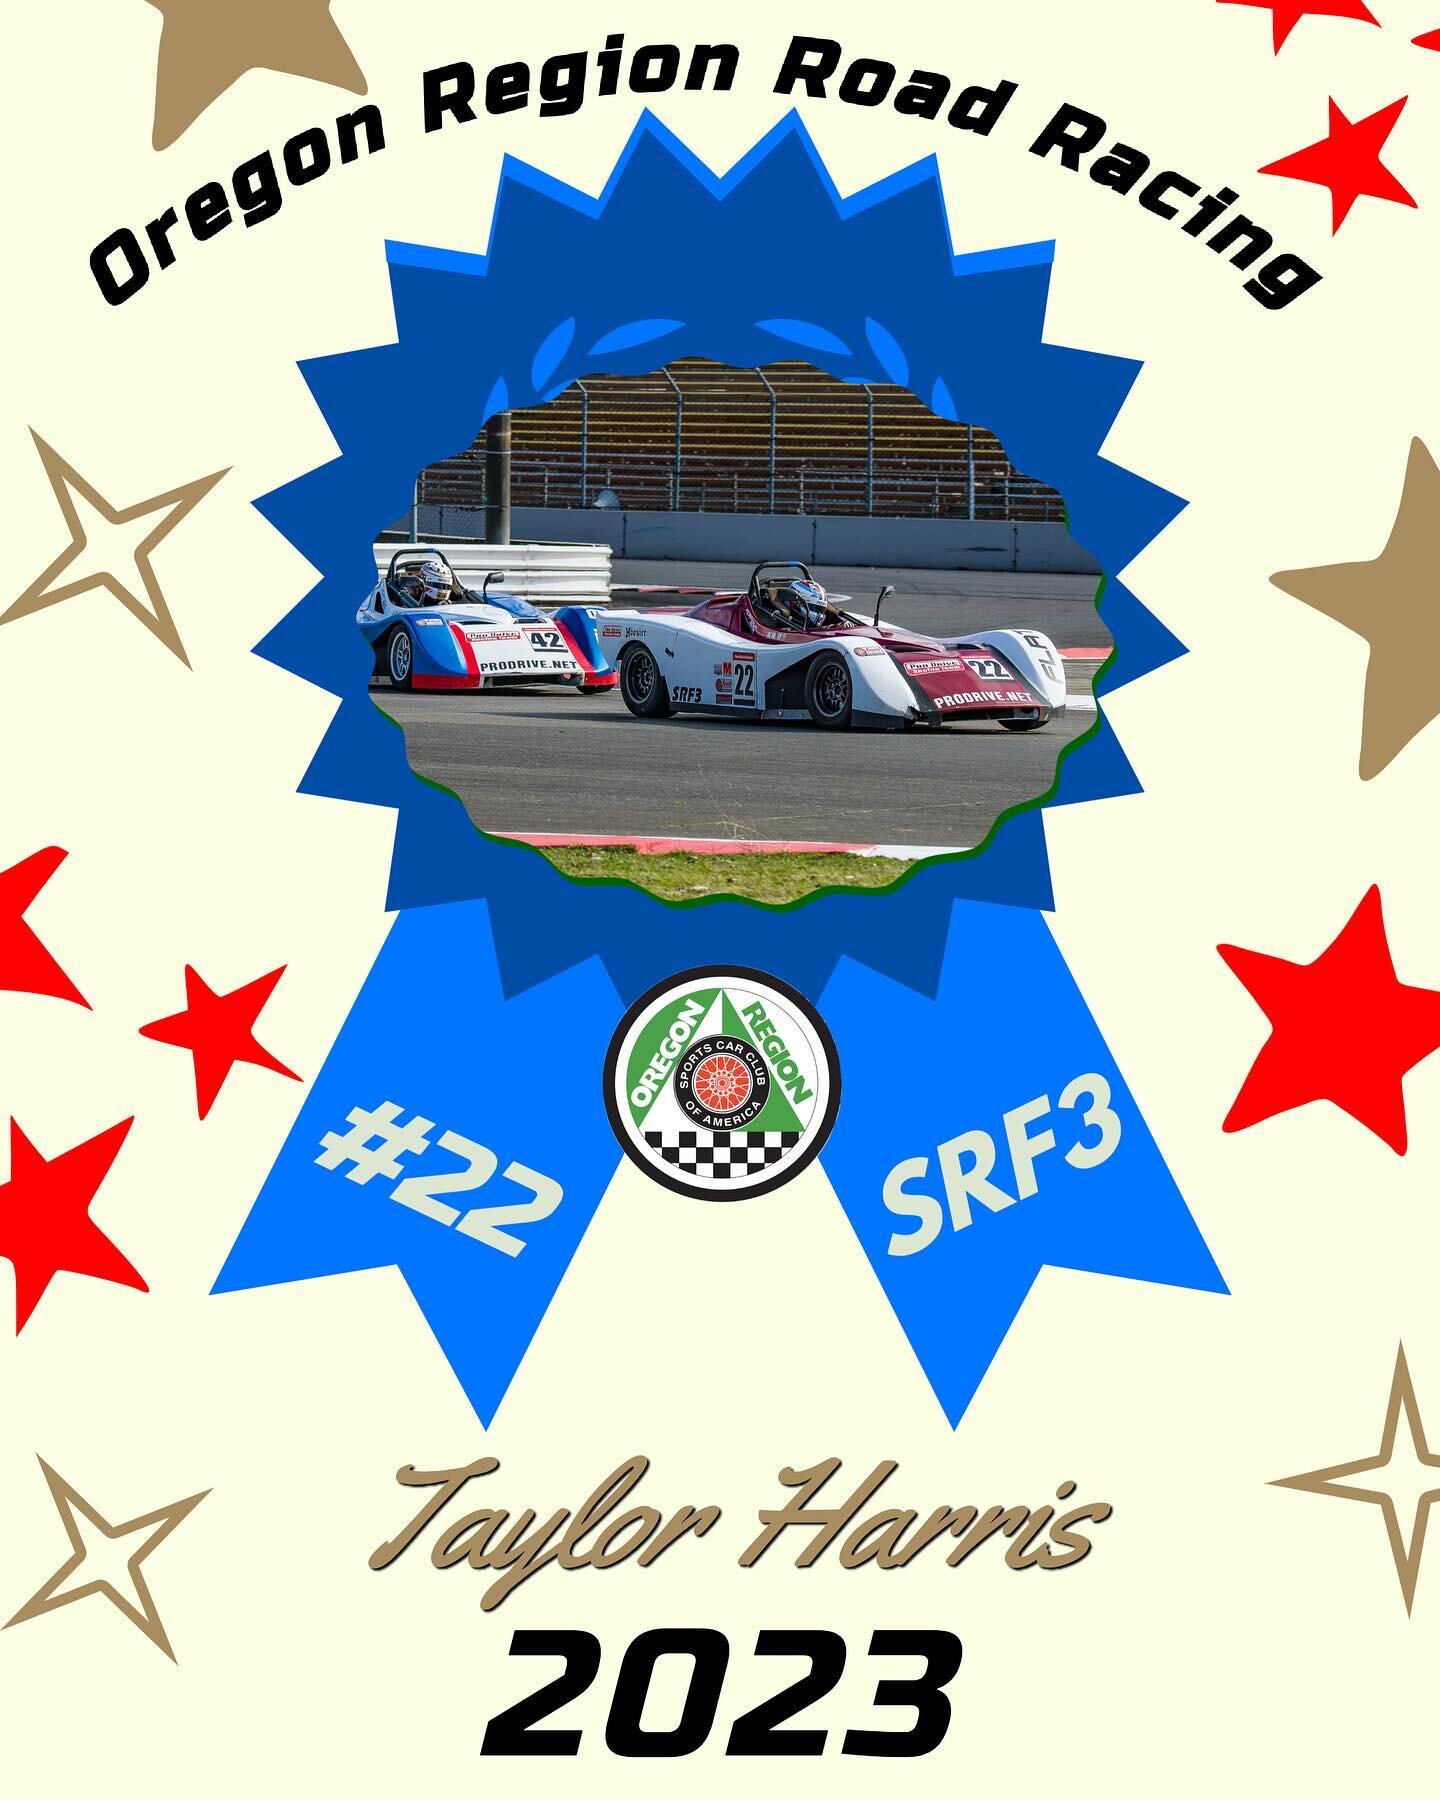 Three Oregon Region SCCA Champions crowned in 2023! 🏆Congratulations to @taylor_harris_racing for SRF3, @madi_14kracing for T3, and @jeremykinzer7788 for Spec Miata. A seasons worth of dedication and consistent results to earn this achievement. Well